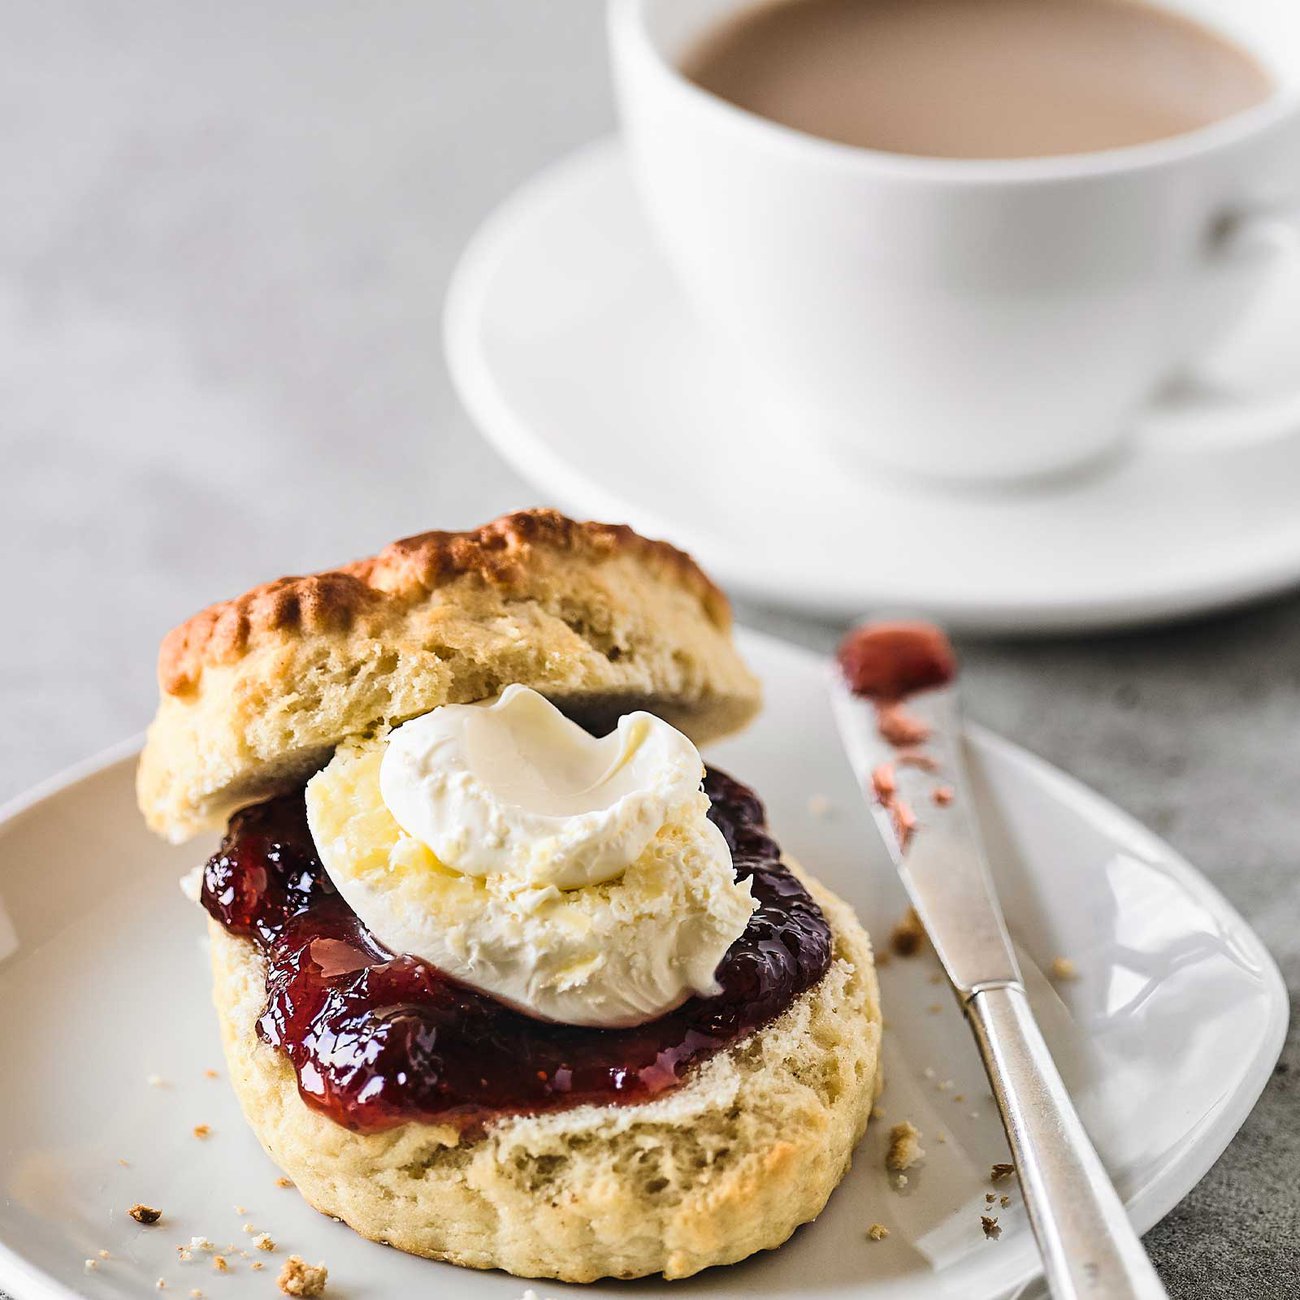 Scones with jam and cream are the most famous part of afternoon tea